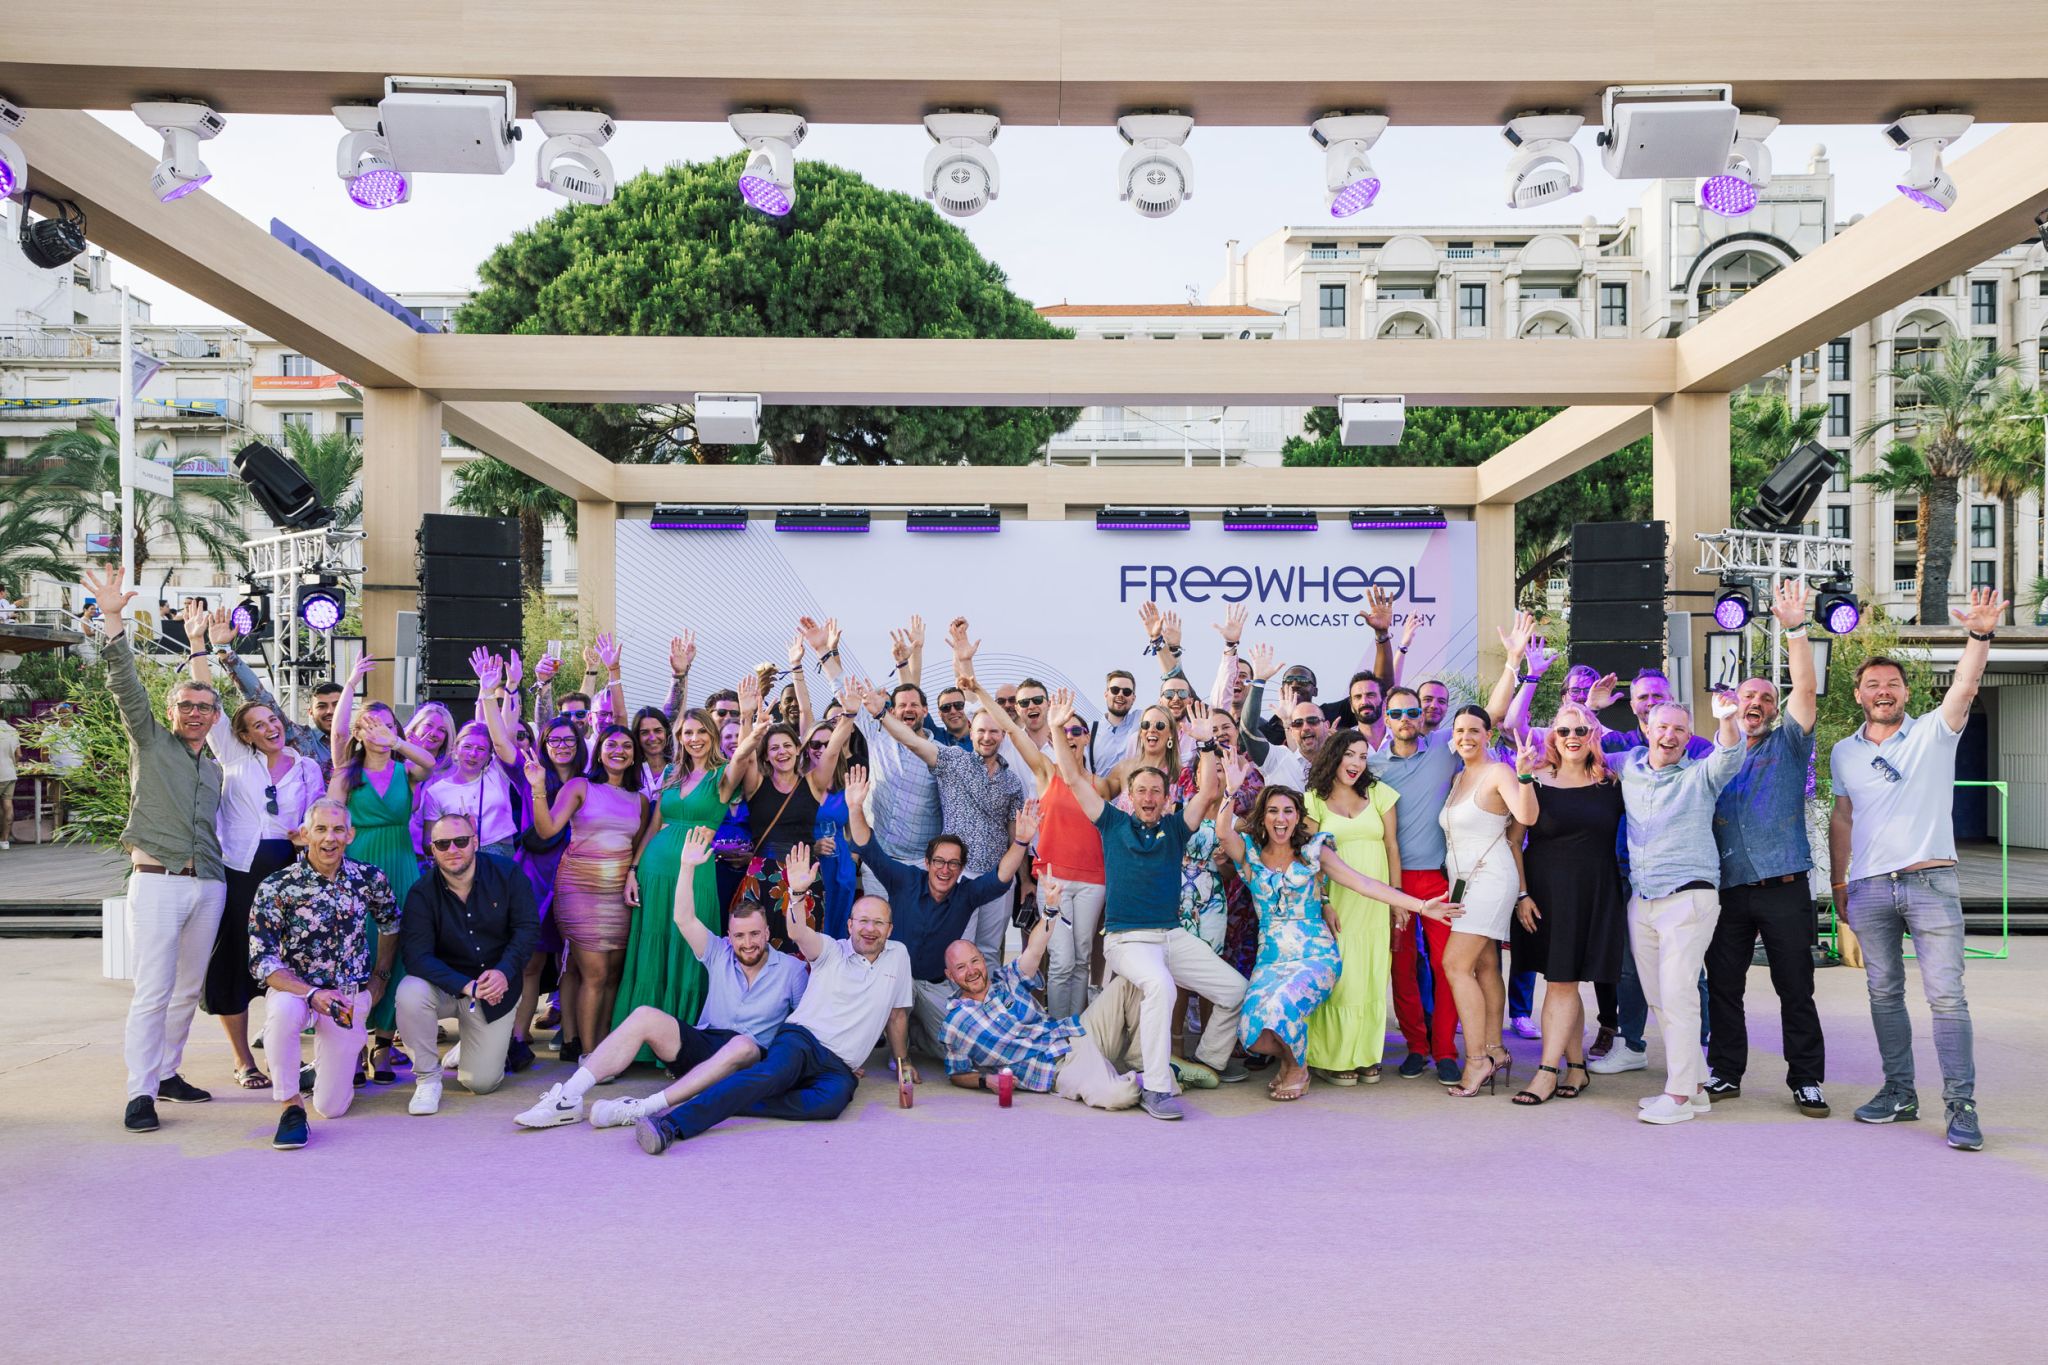 Large group photo of Freewheel team members in an outdoor stage setup at Cannes, France.